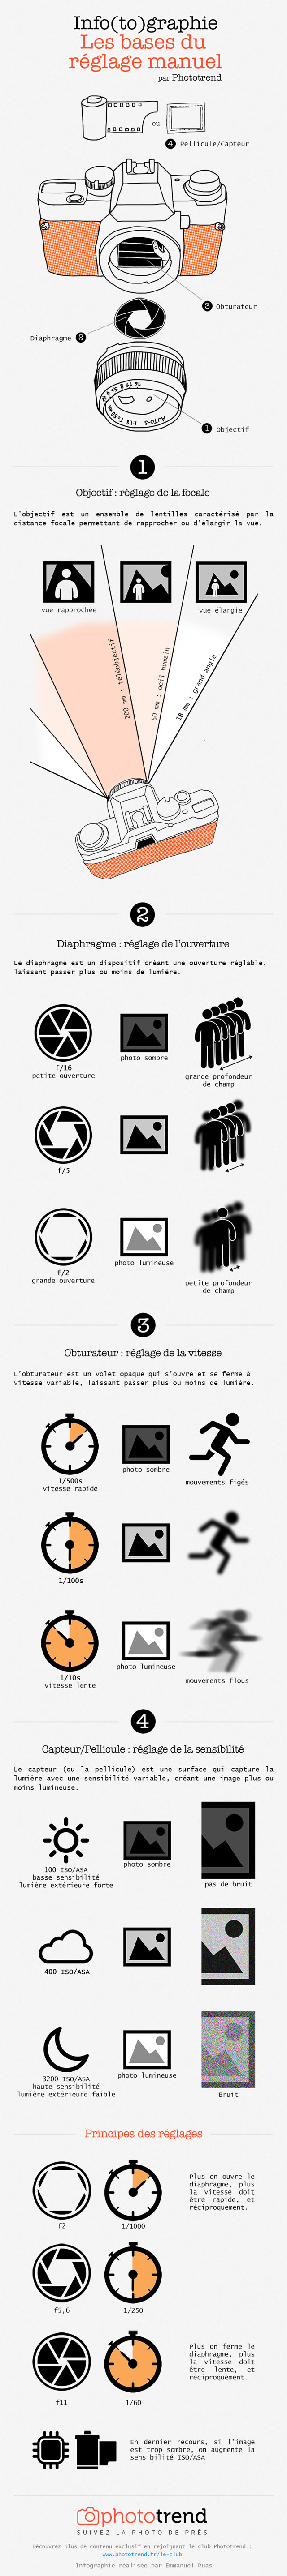 info(to)graphie-phototrend-manuel